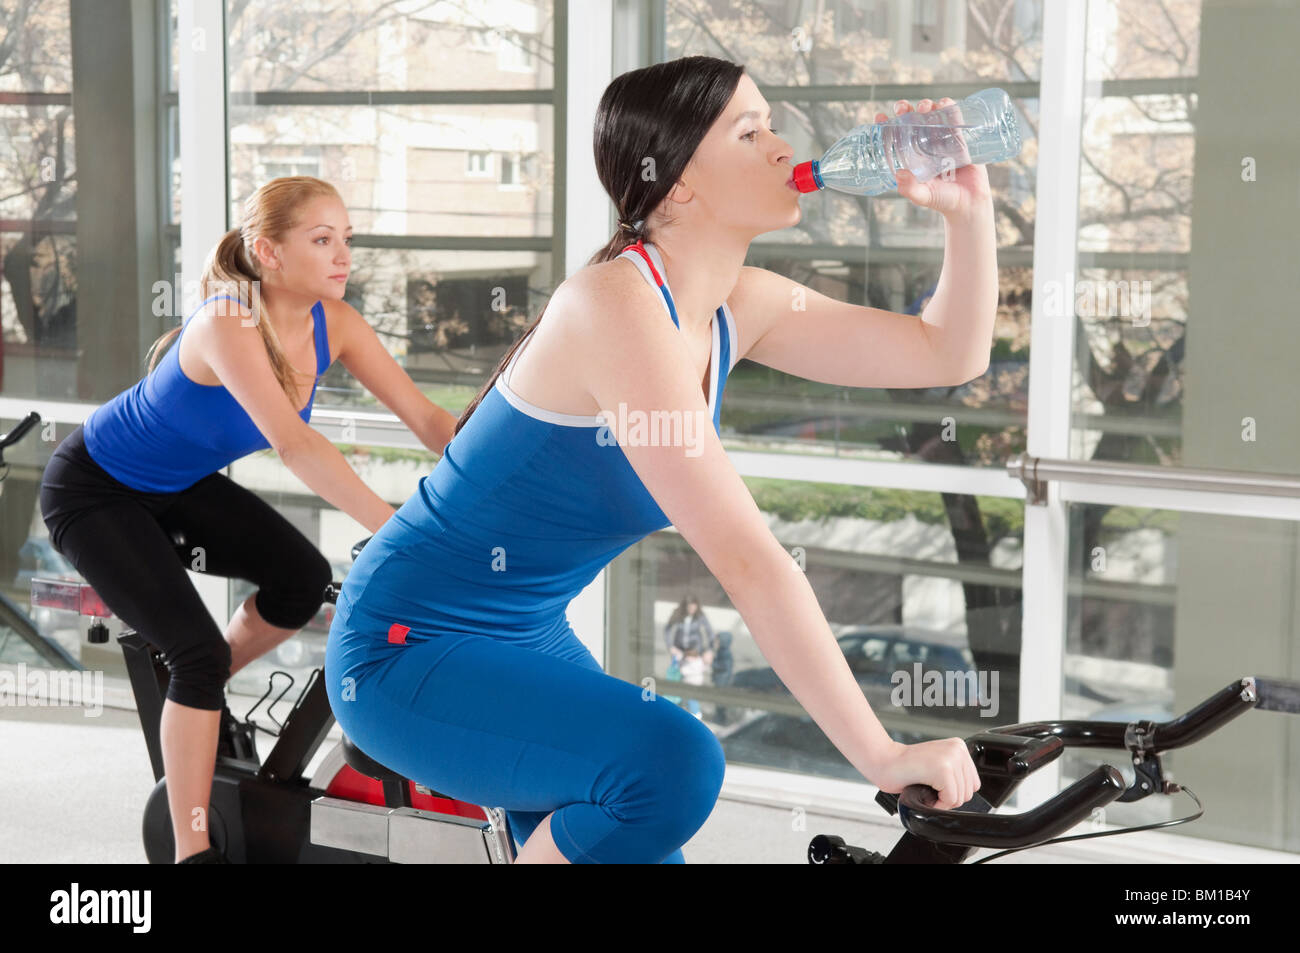 Woman drinking water and working out with another woman in a gym Stock Photo